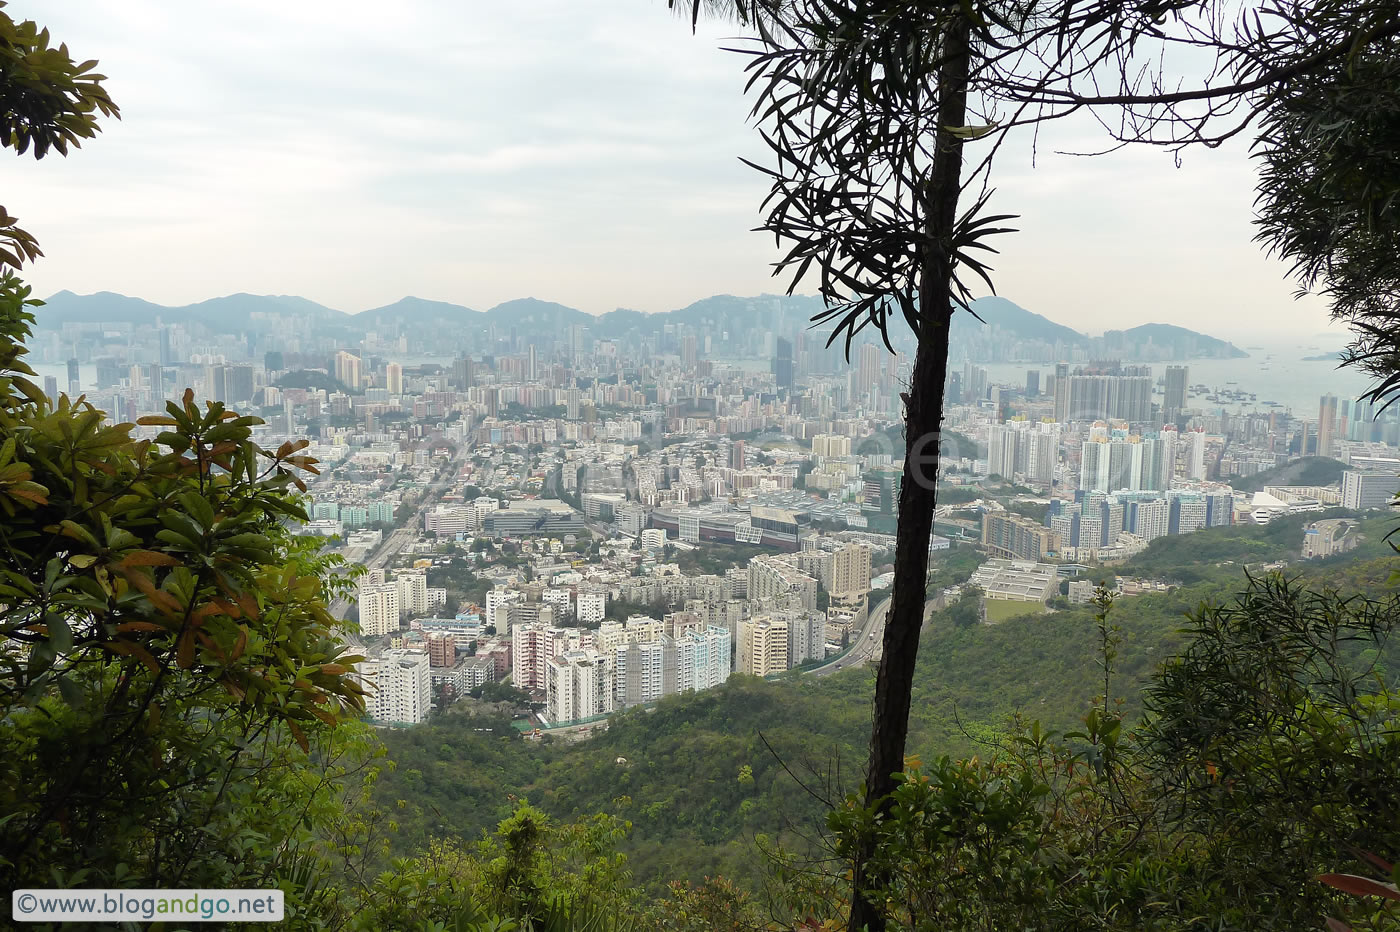 Maclehose Trail 5 - West side of Kowloon